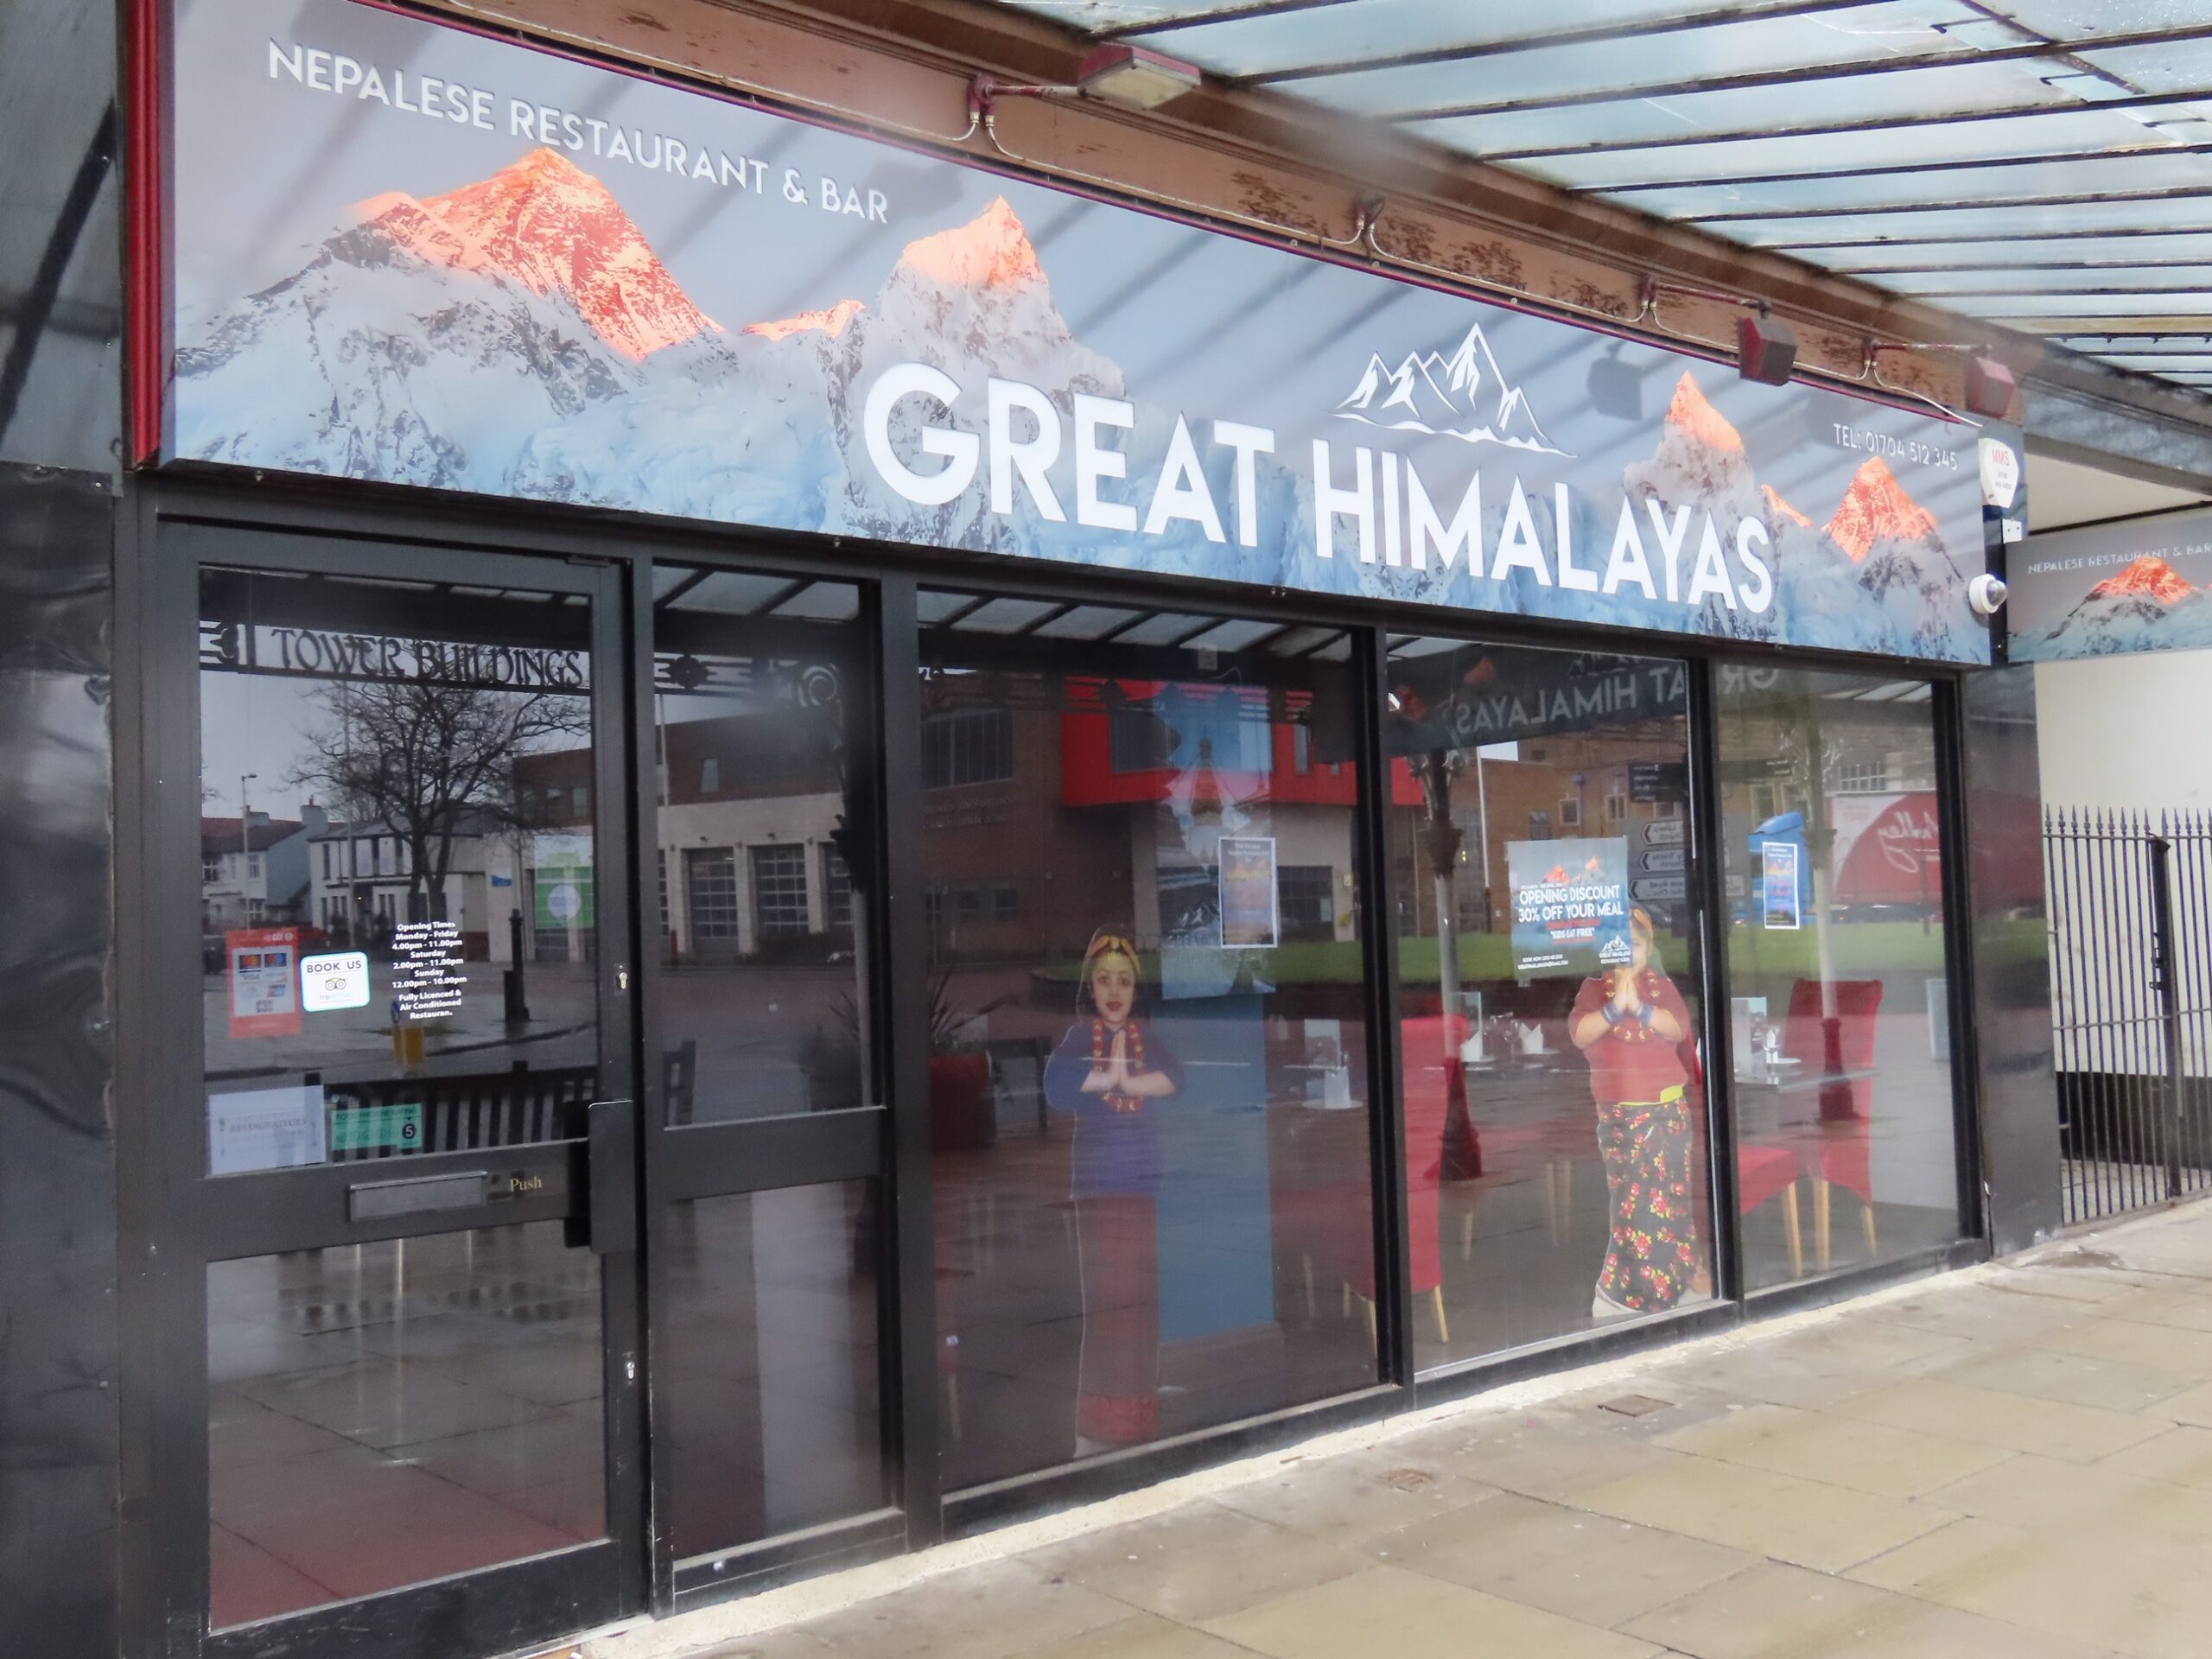 The Great Himalayas restaurant on Lord Street in Southport. Photo by Andrew Brown Media